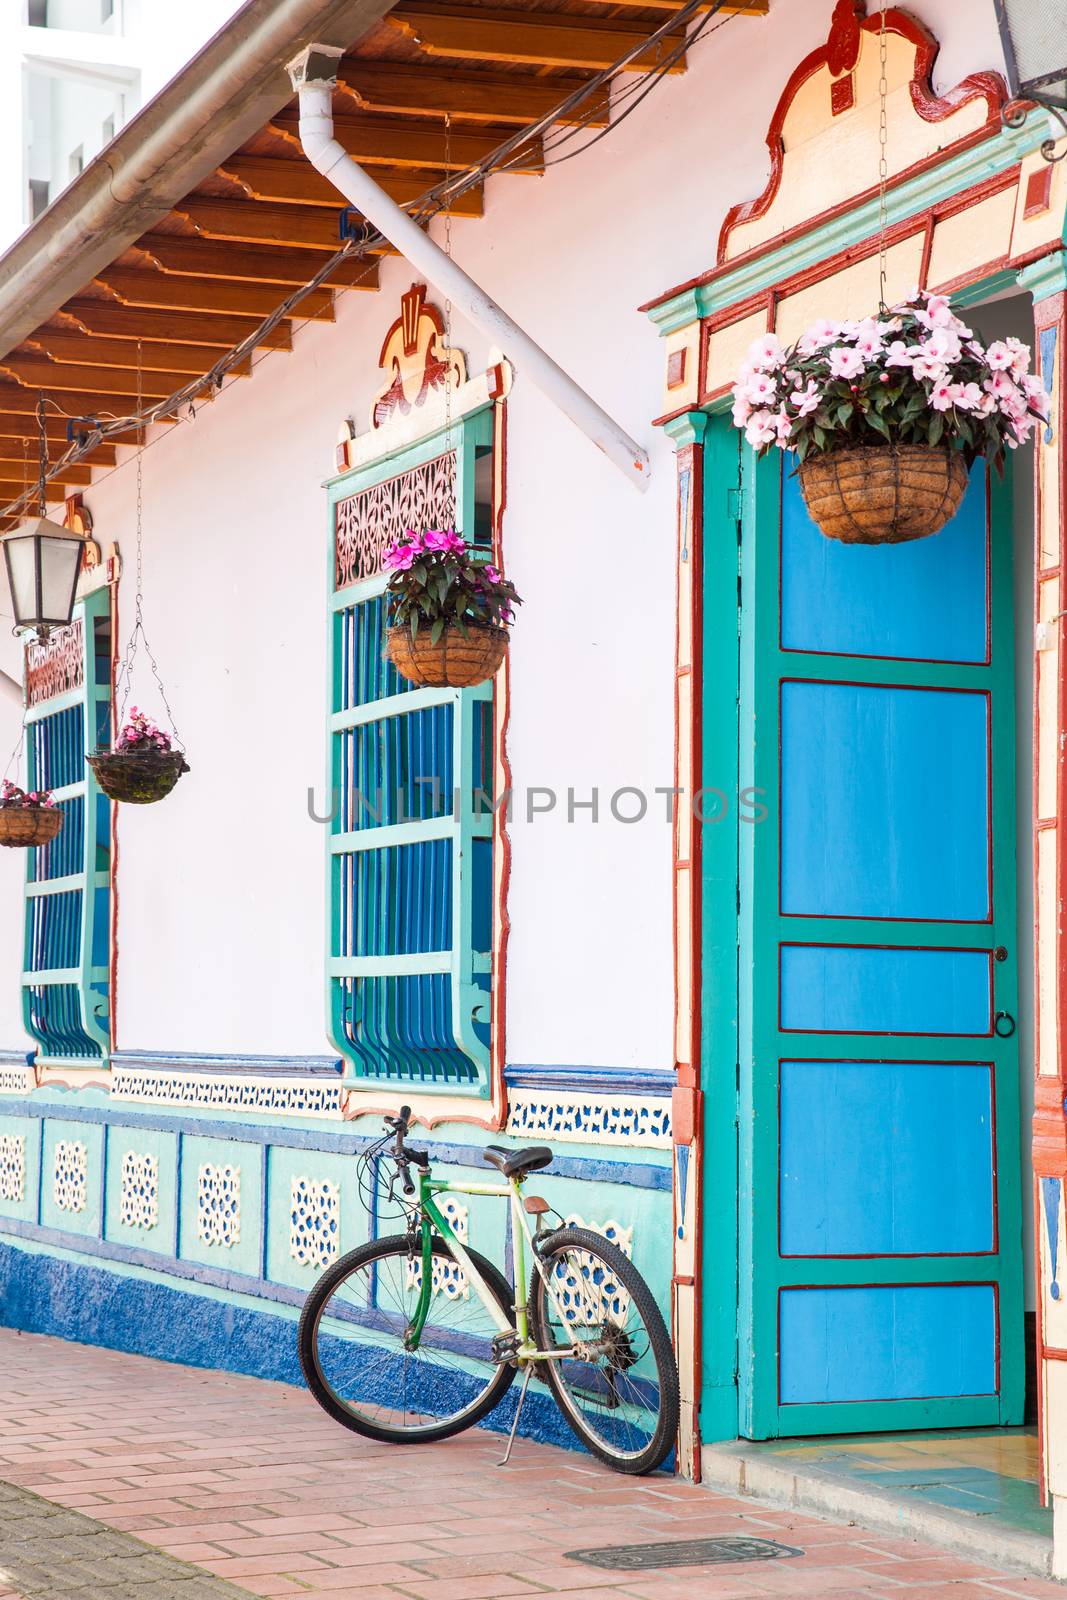 Bicycle next to a beautiful blue and white house at Guatape, Colombia